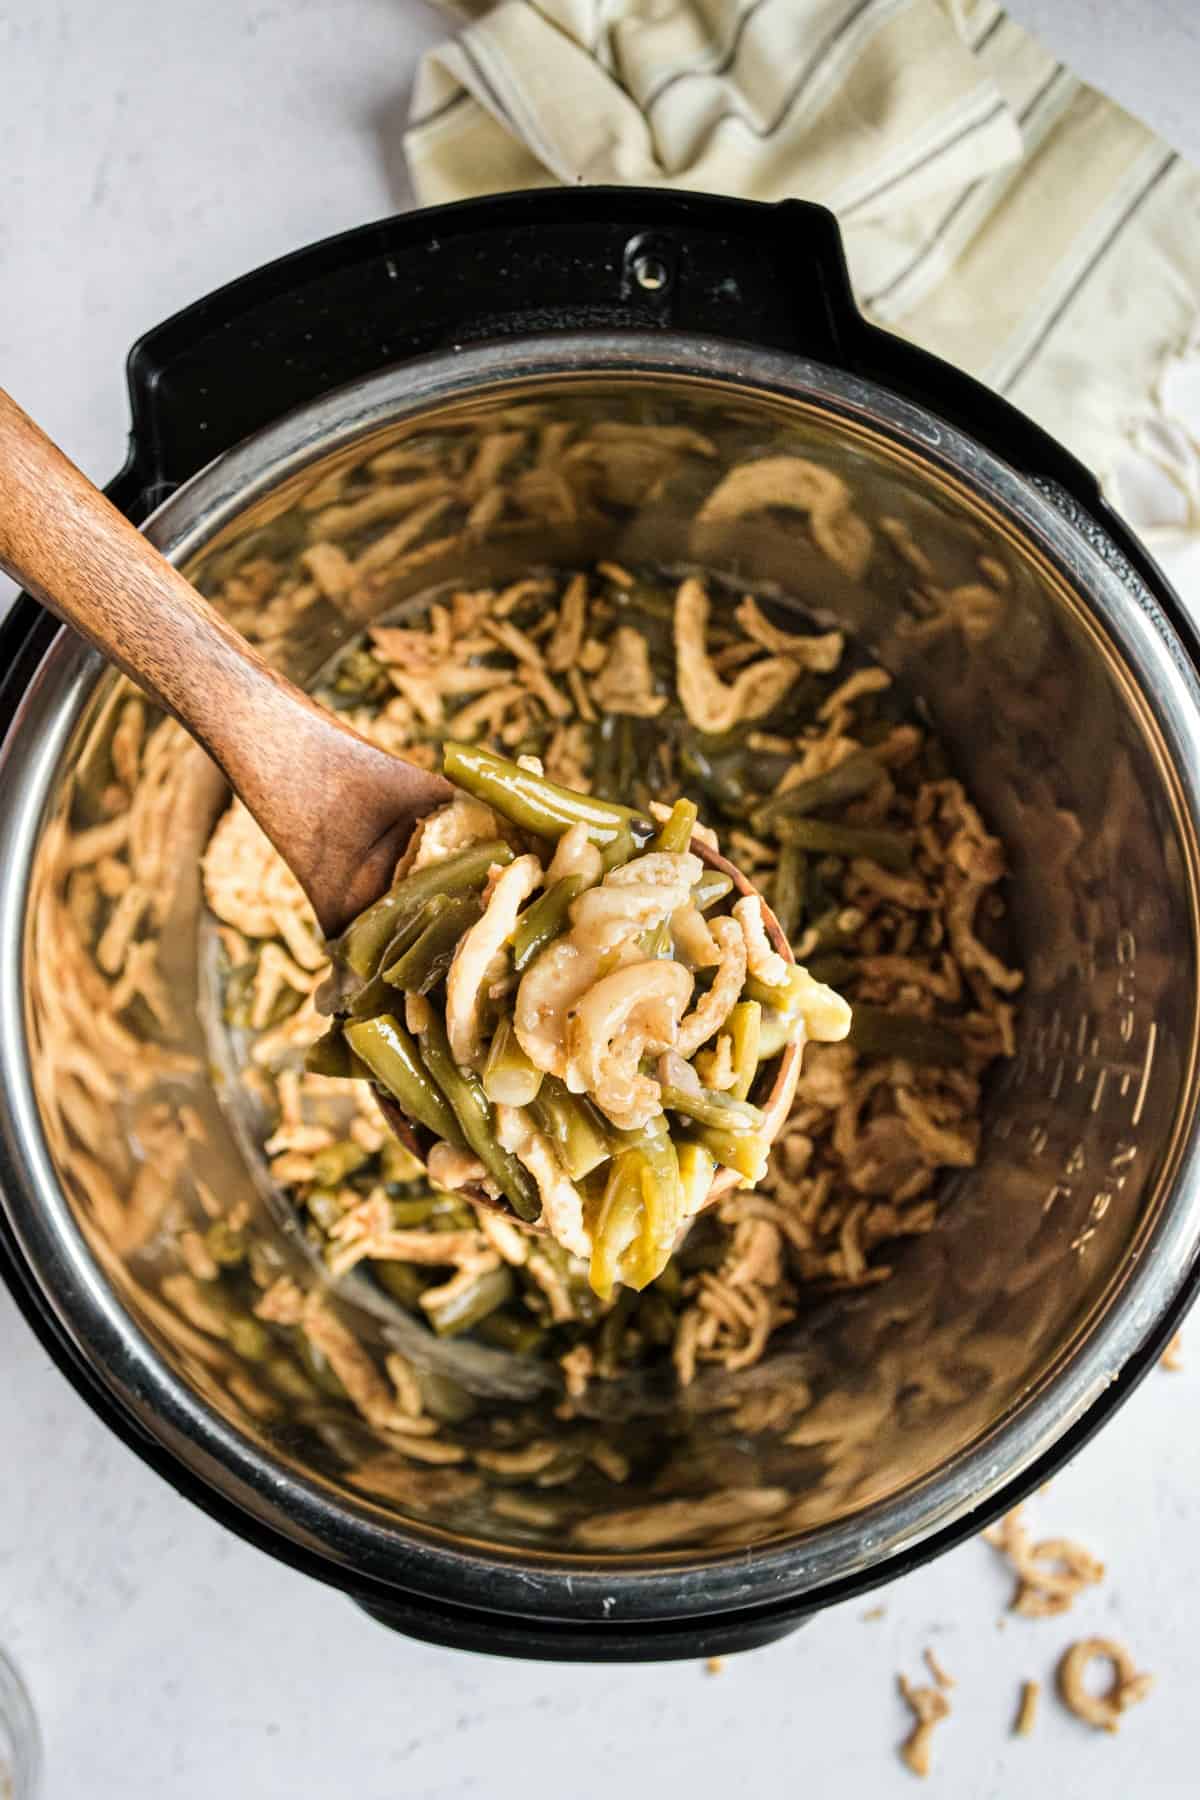 Instant pot green bean casserole being lifted by wooden spoon.